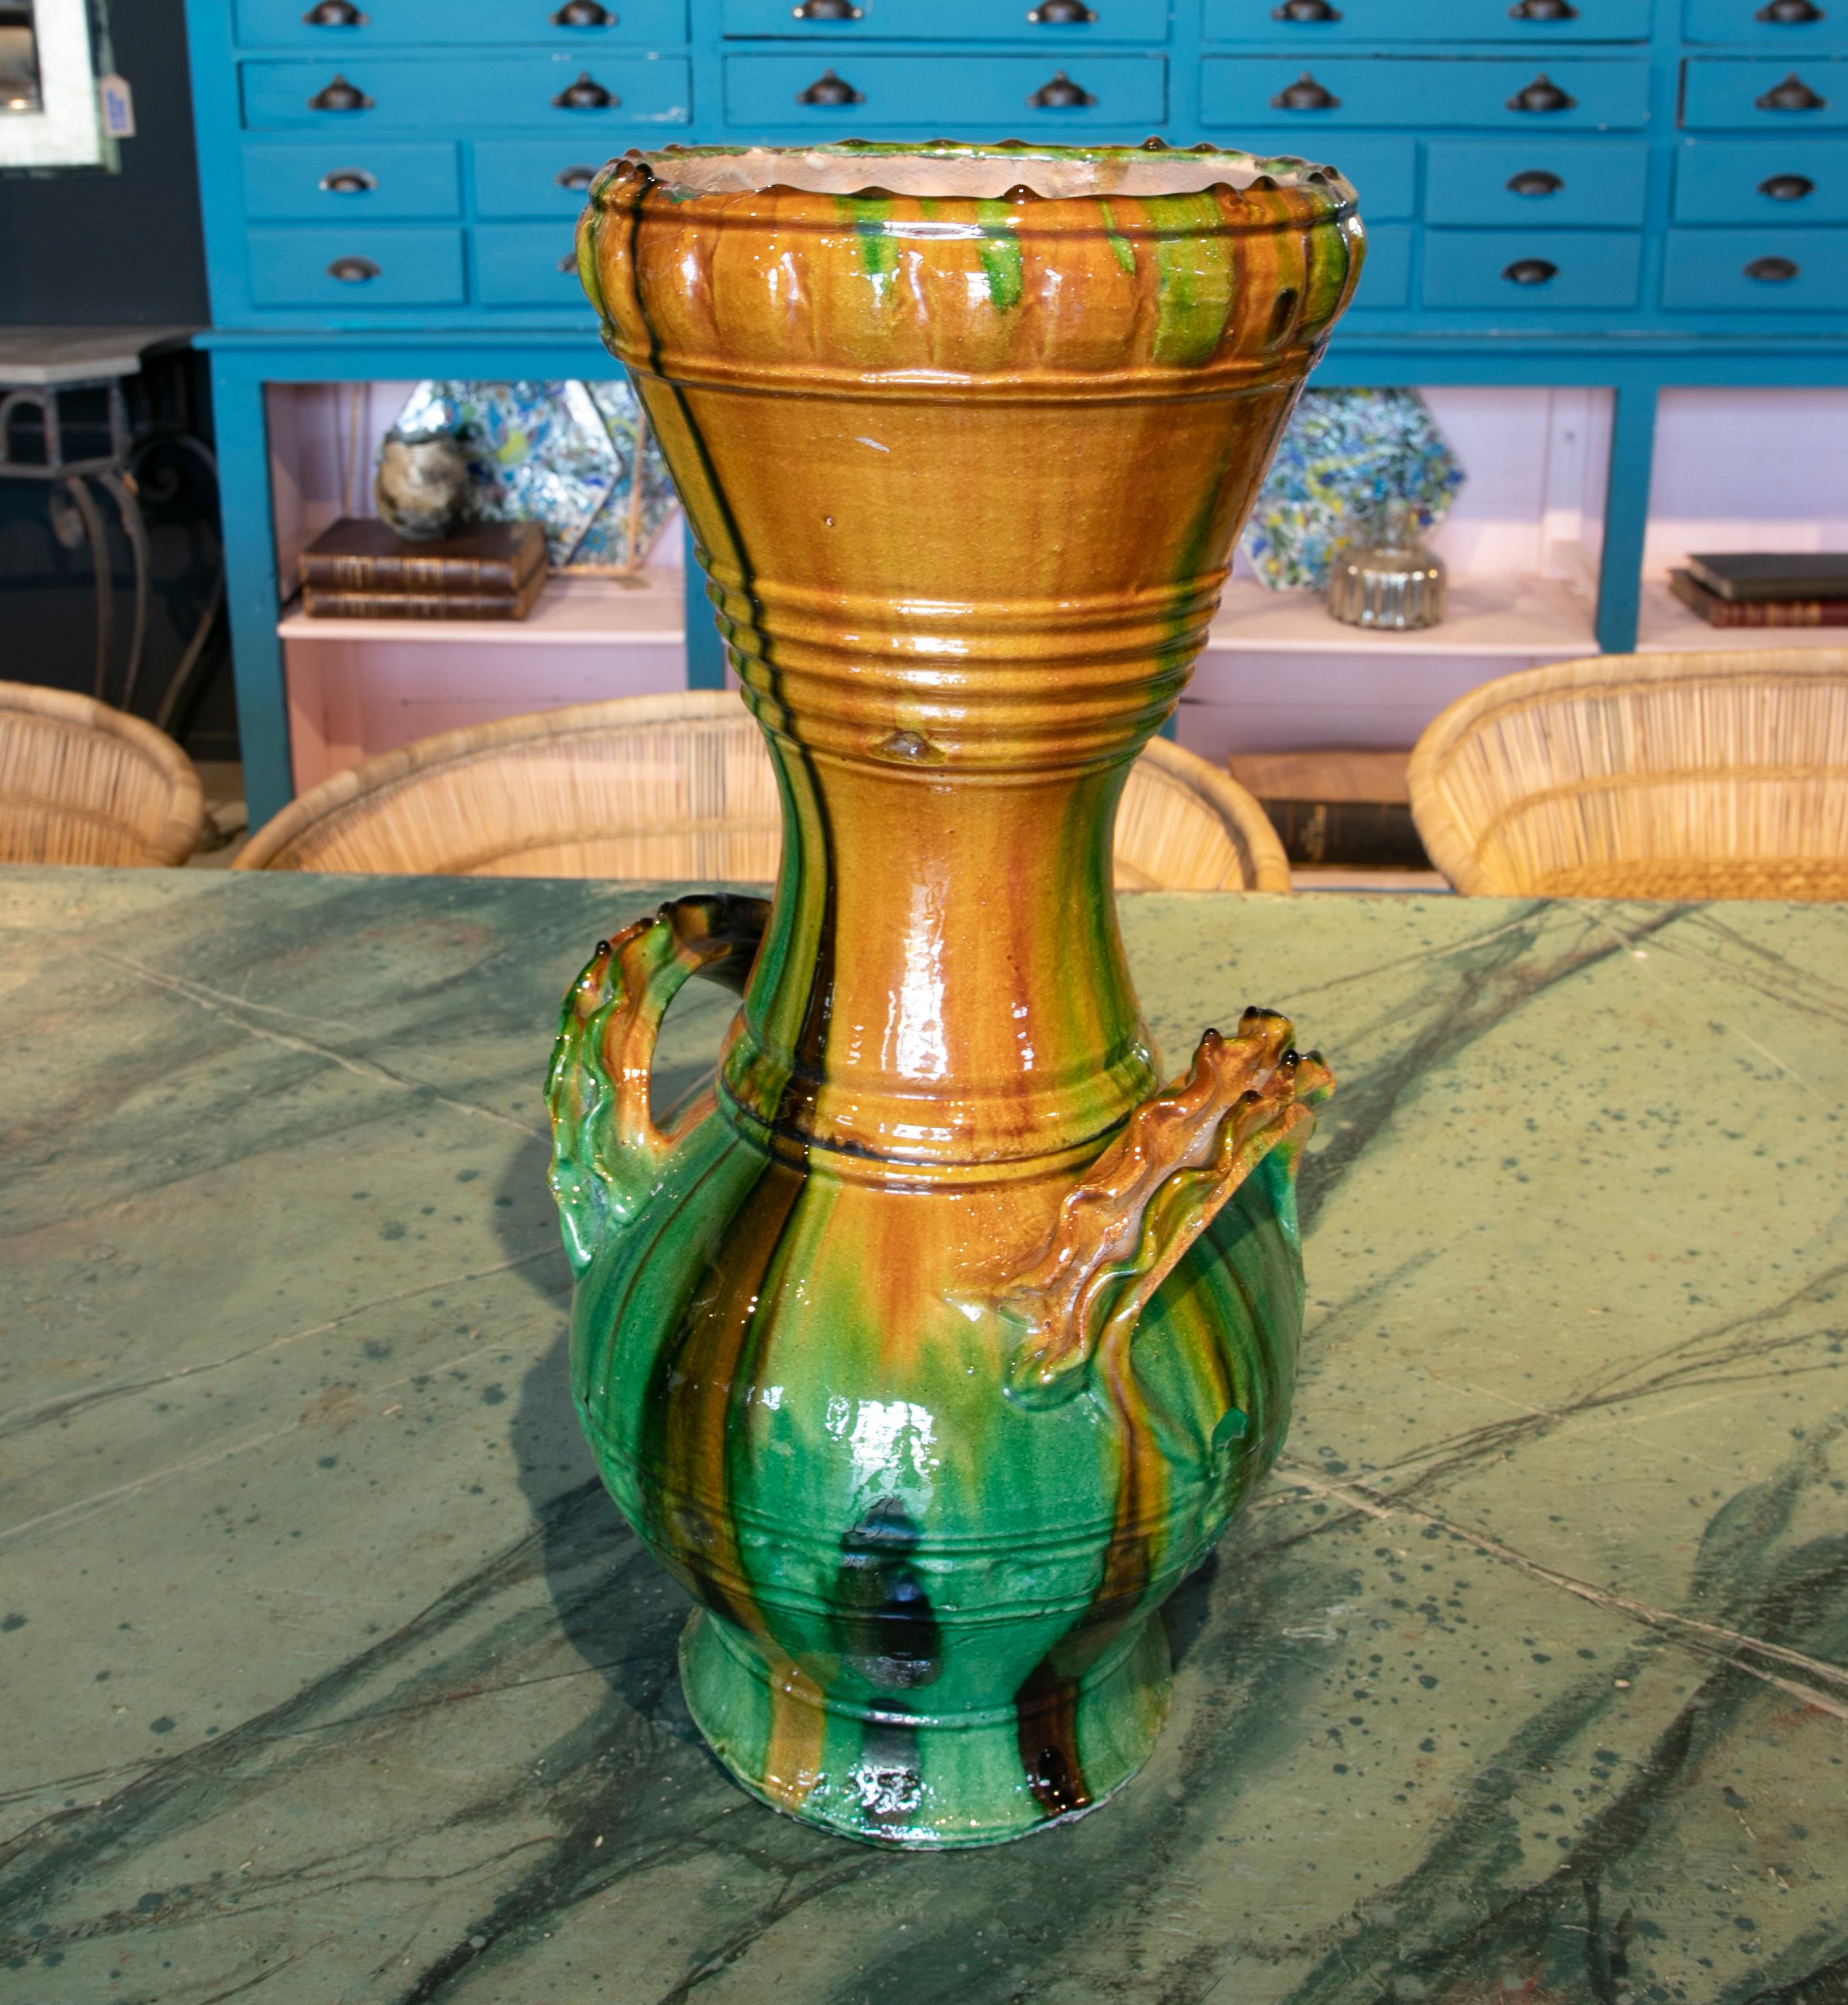 Rustic 1970s Spanish brown and green glazed terracotta ceramic vase with handles.